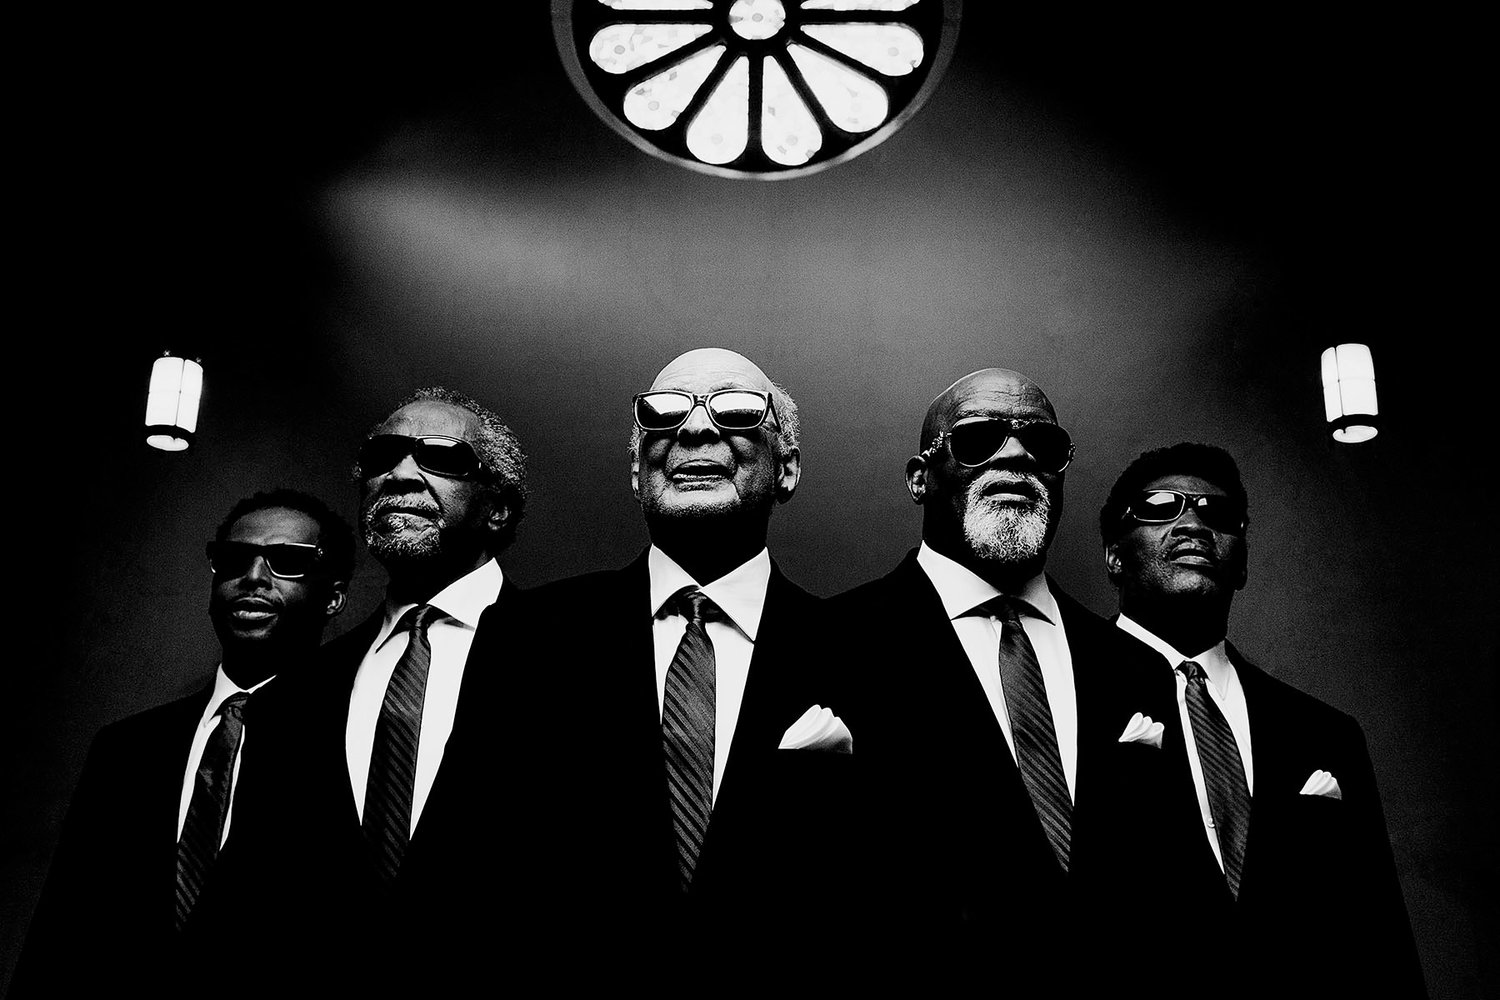 The Blind Boys of Alabama will perform on Saturday, Jan. 8 at 7 p.m.